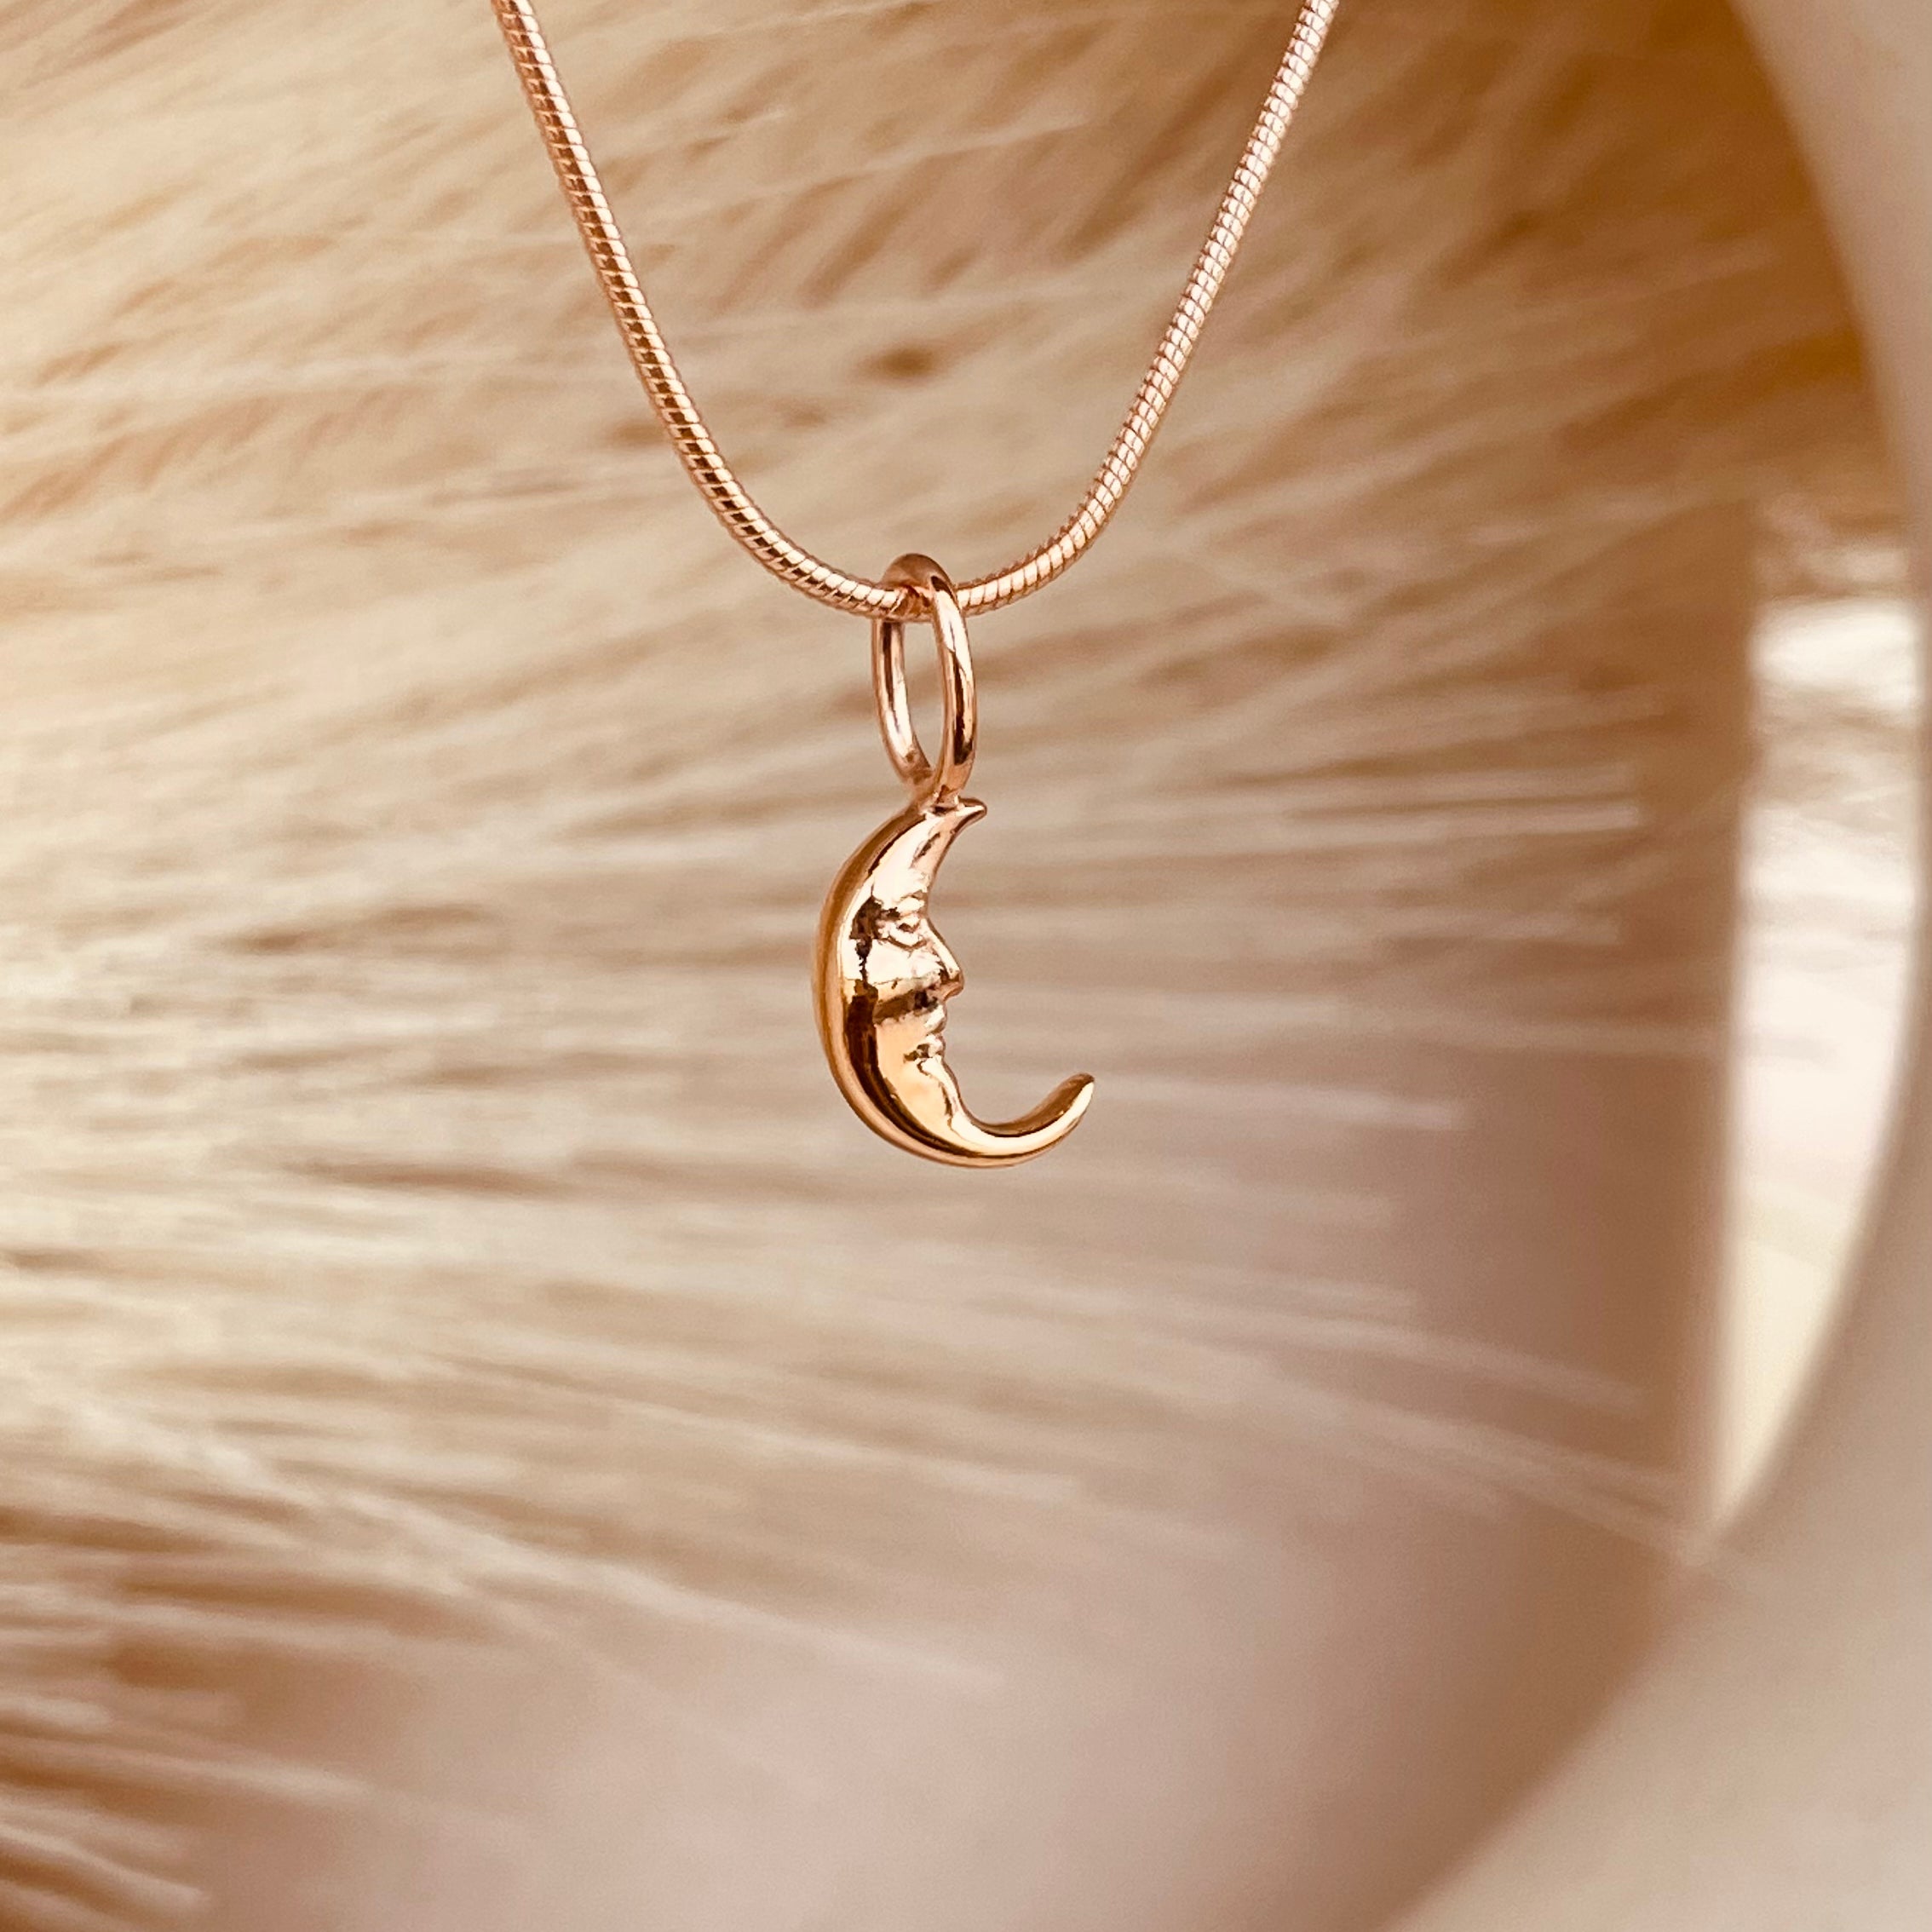 Crescent Moon Necklace with Snake Chain - Octonov 